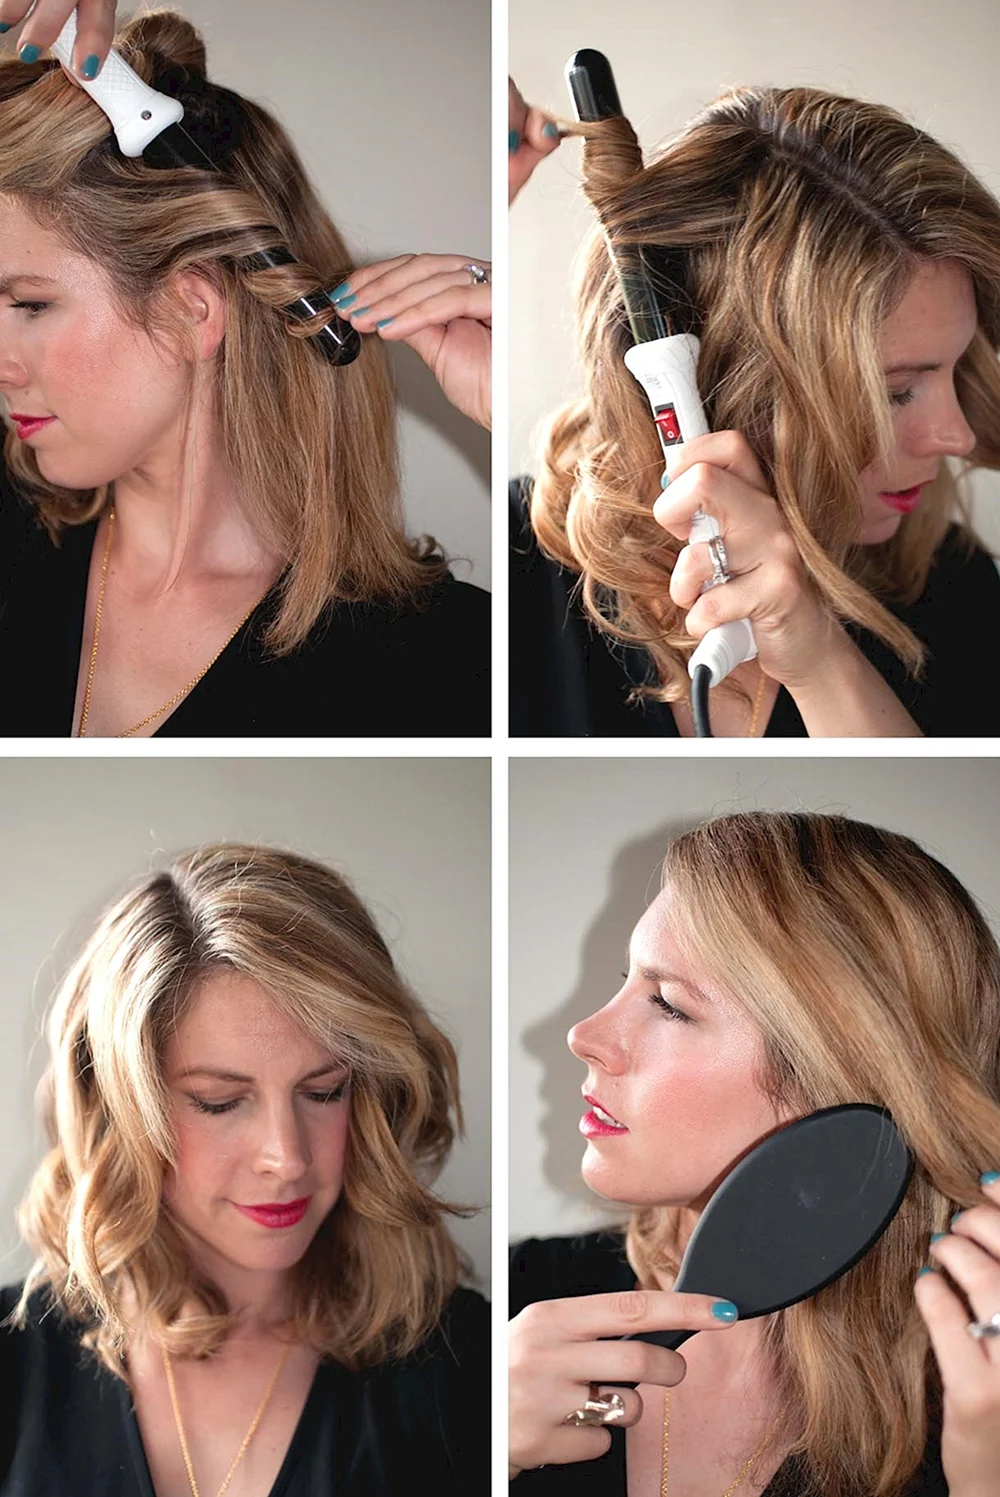 How to Curl your hair